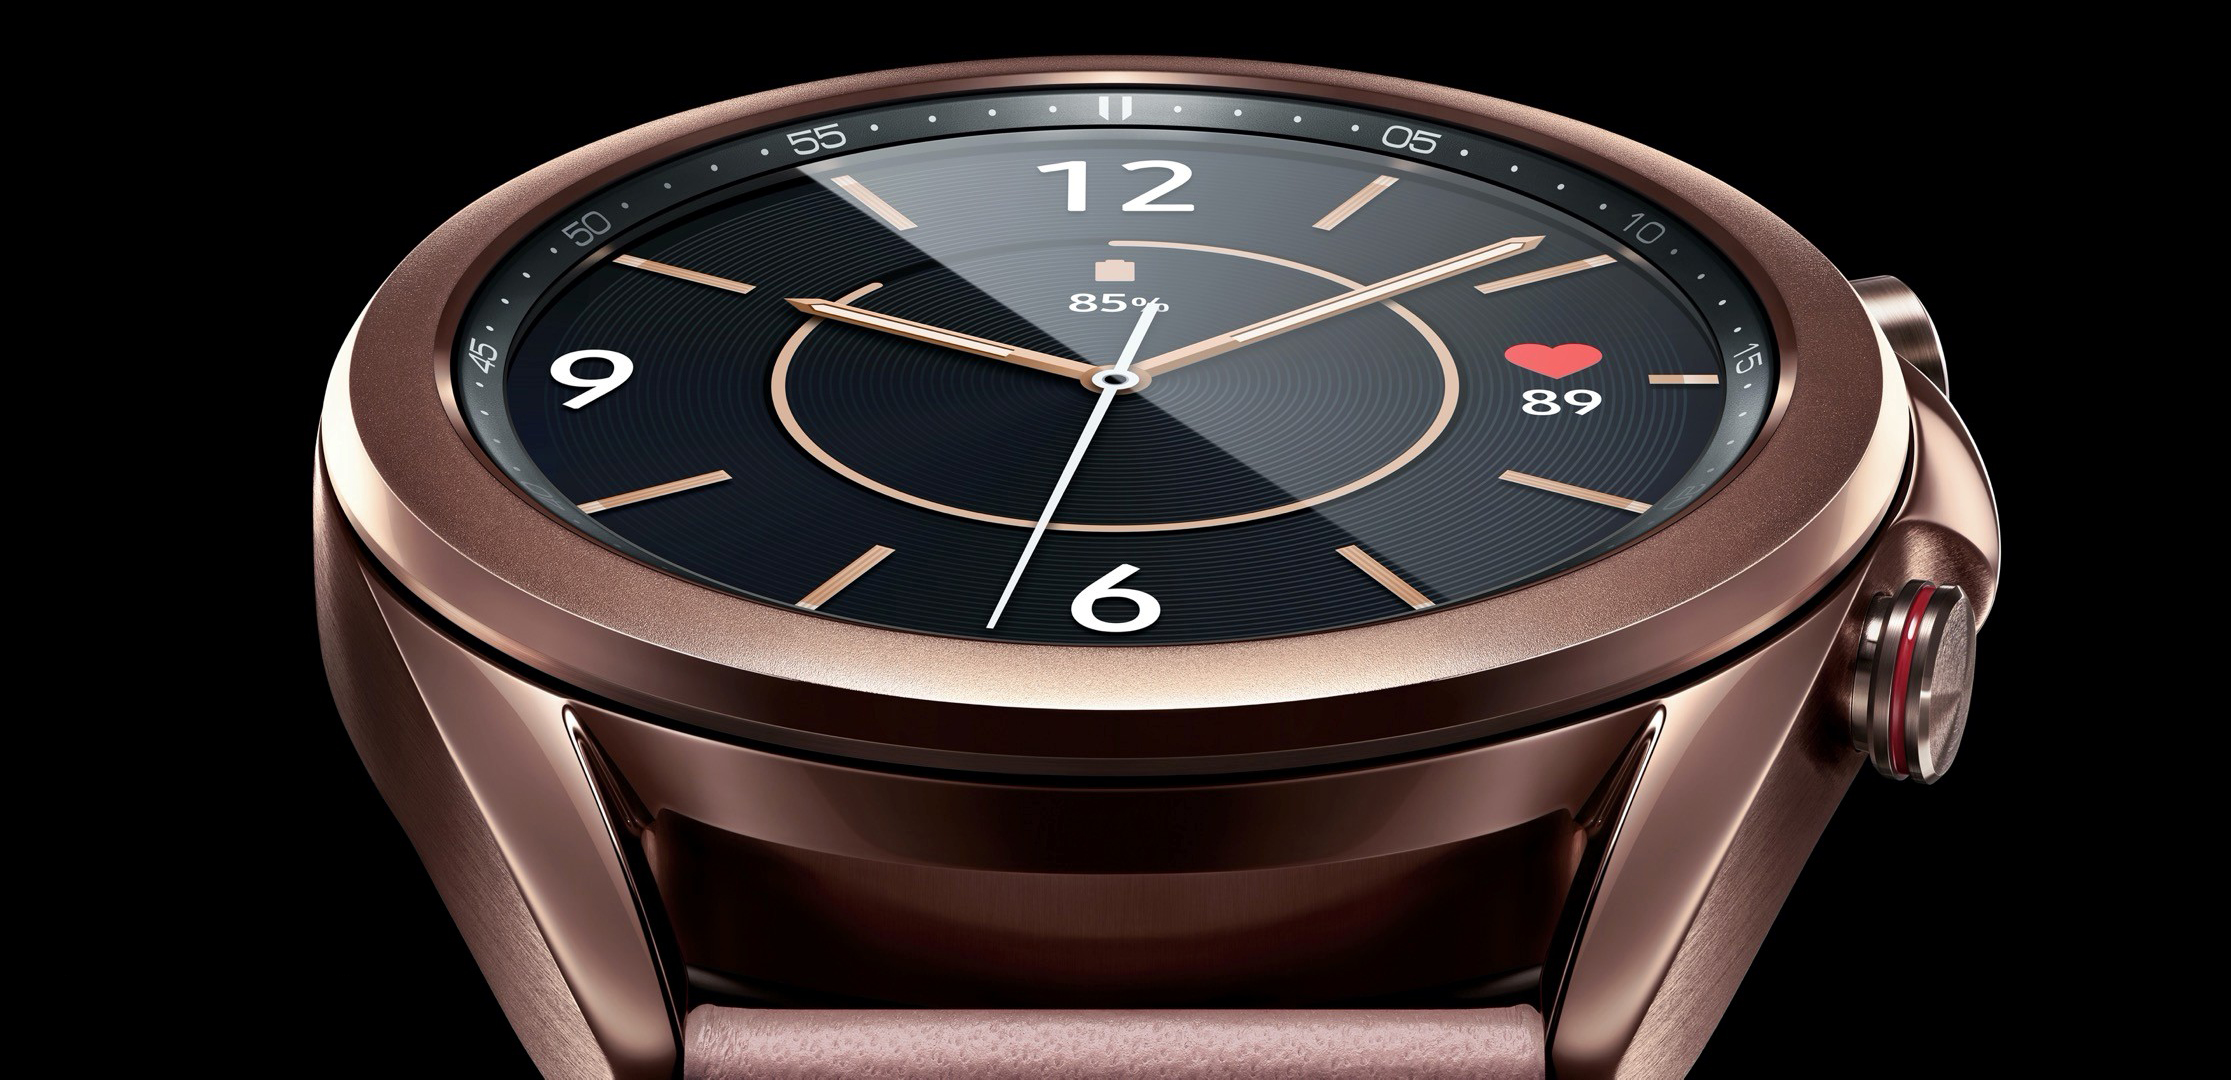 New Images Offer A Look At Galaxy Watch 3 Color Variants Features Specs Sammobile